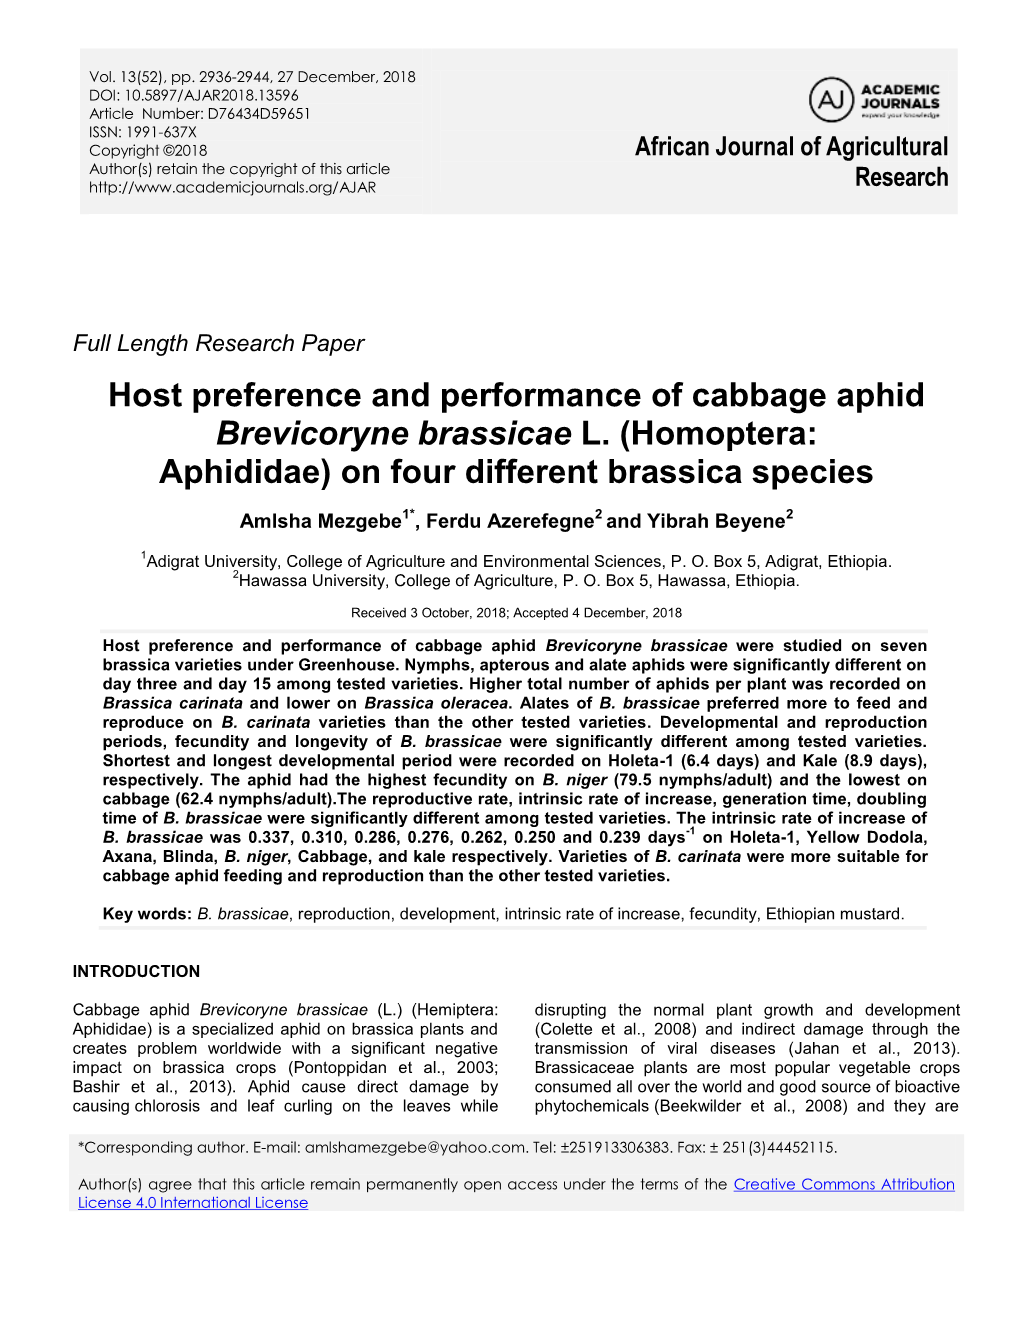 Host Preference and Performance of Cabbage Aphid Brevicoryne Brassicae L